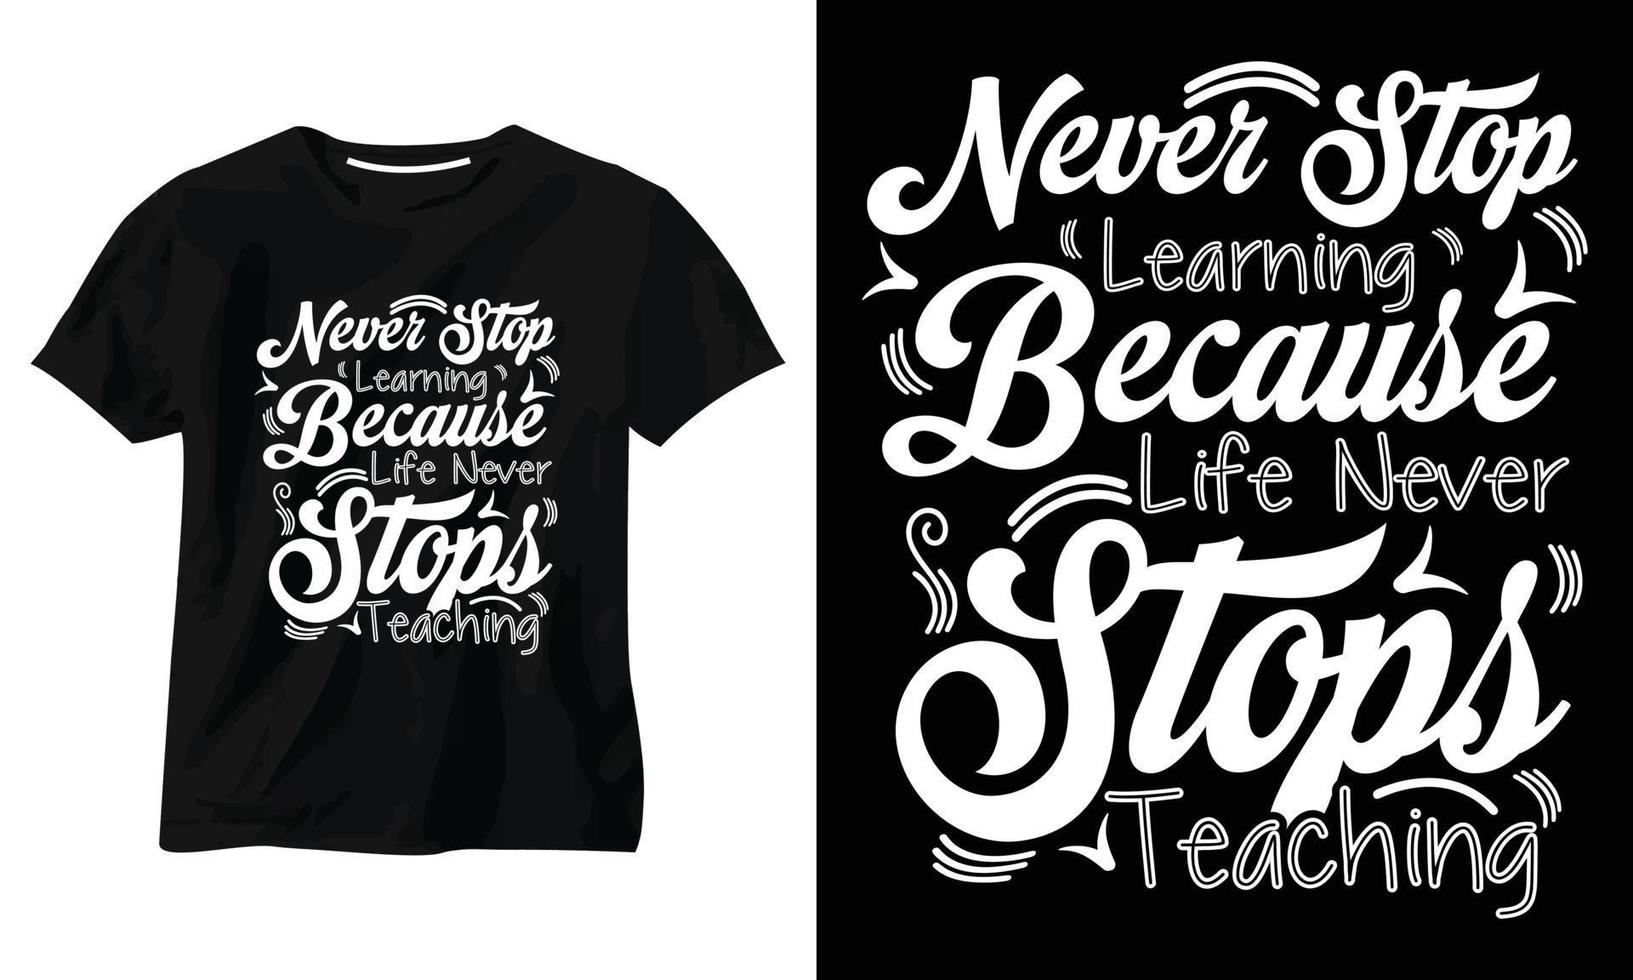 Never Stop Learning Because Life Never stops Teaching typography t shirt design vector